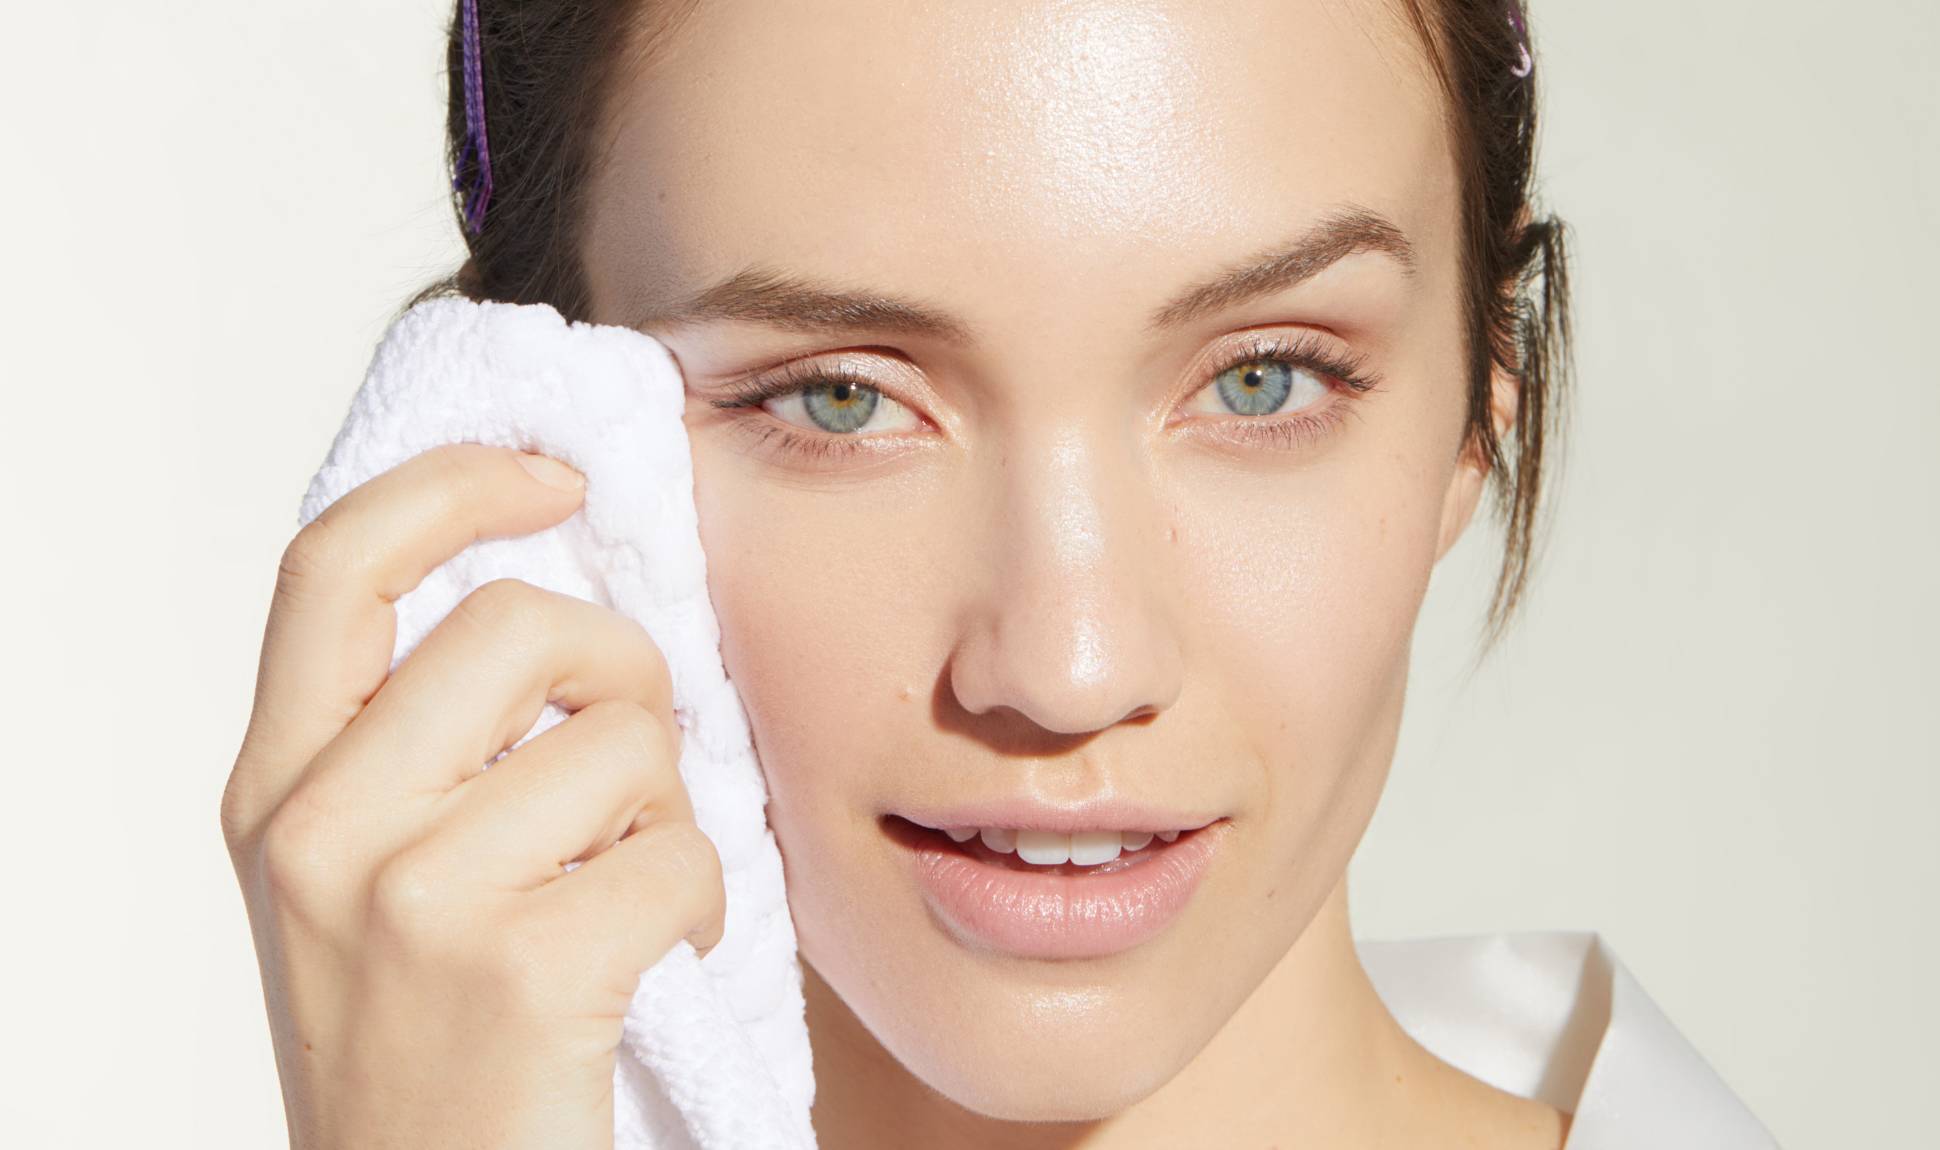 Oily skin and everything you need to know about caring for it